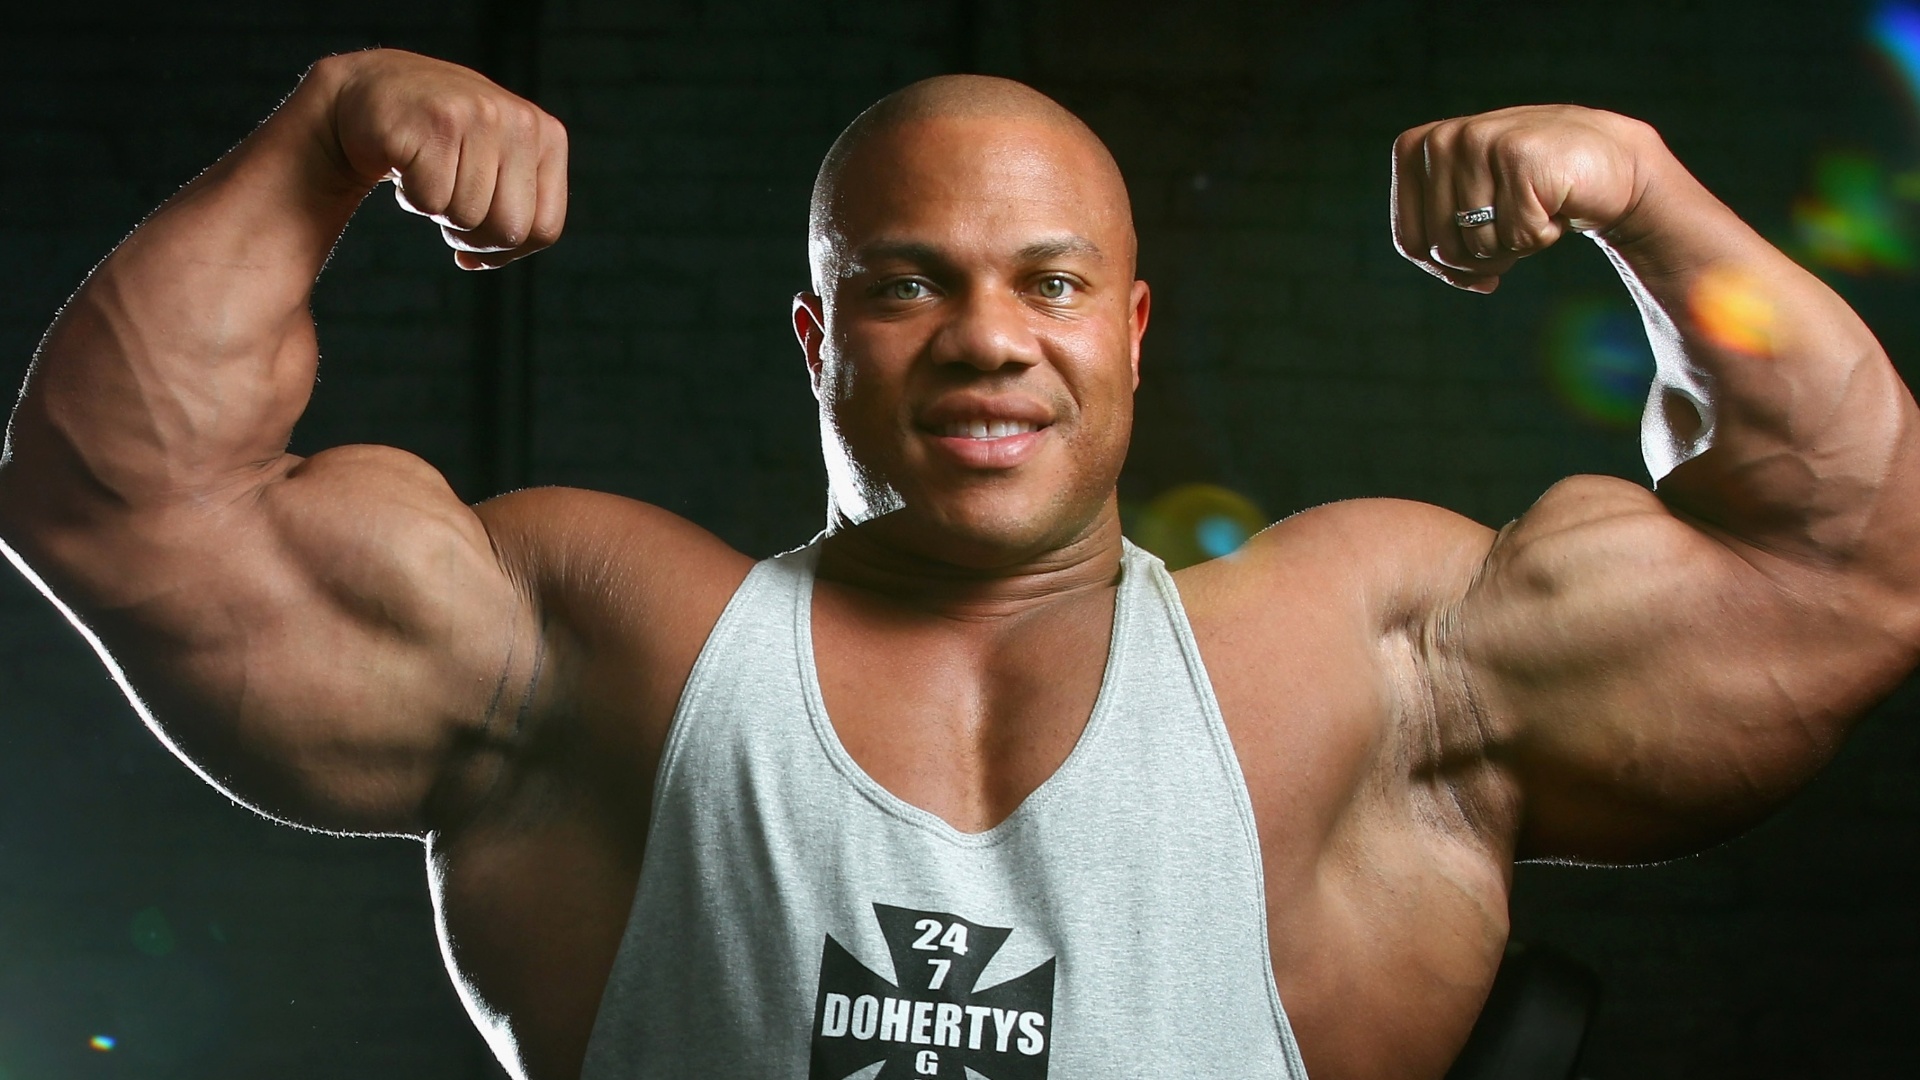 phil heath, bodybuilder, champion Wallpaper, HD Sports 4K Wallpapers,  Images, Photos and Background - Wallpapers Den